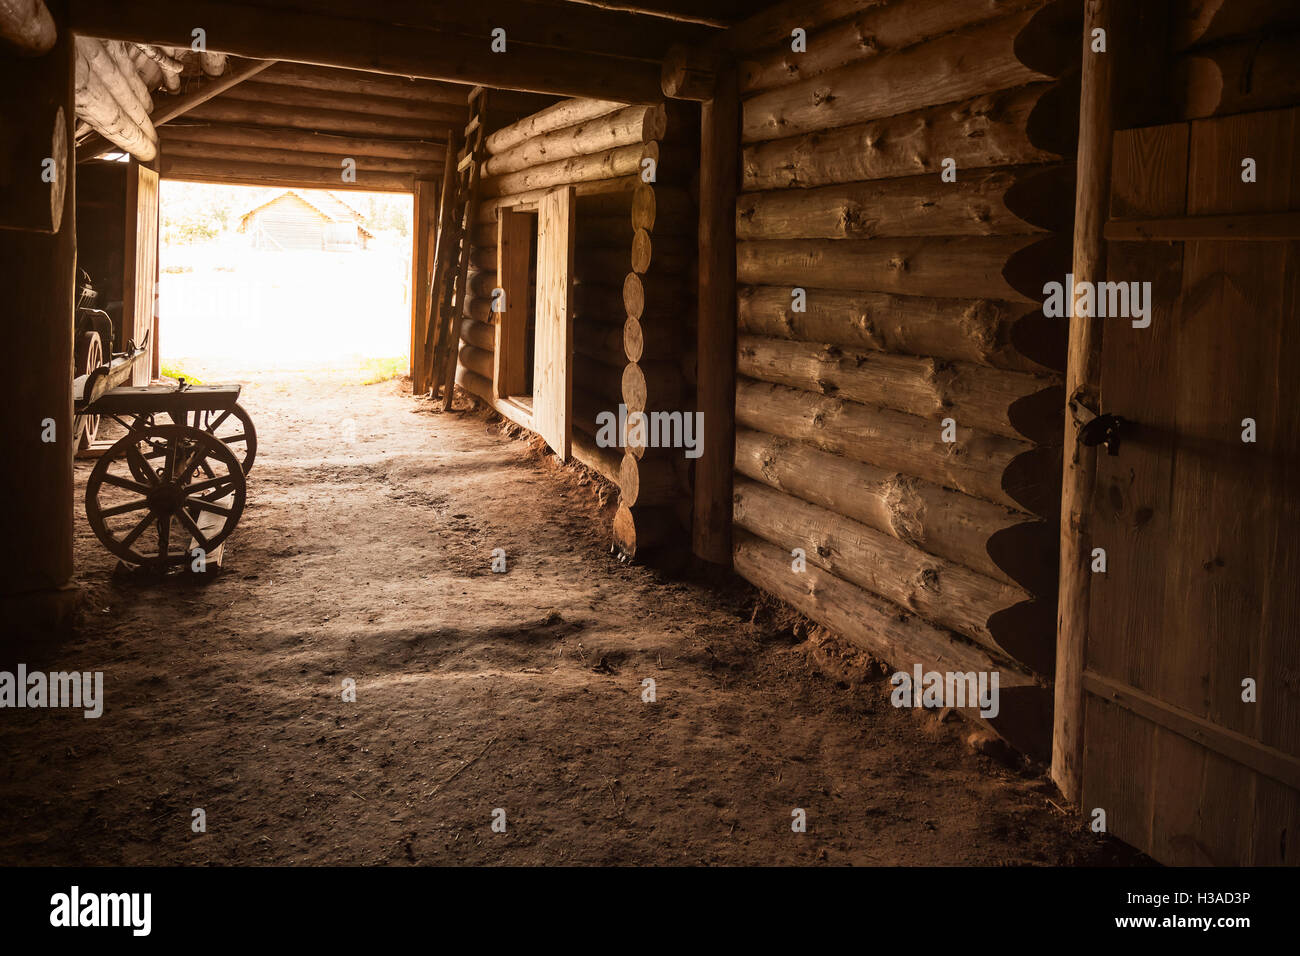 Ancient rural Russian interior. Corridor with walls made of rough logs and closed door in the end Stock Photo